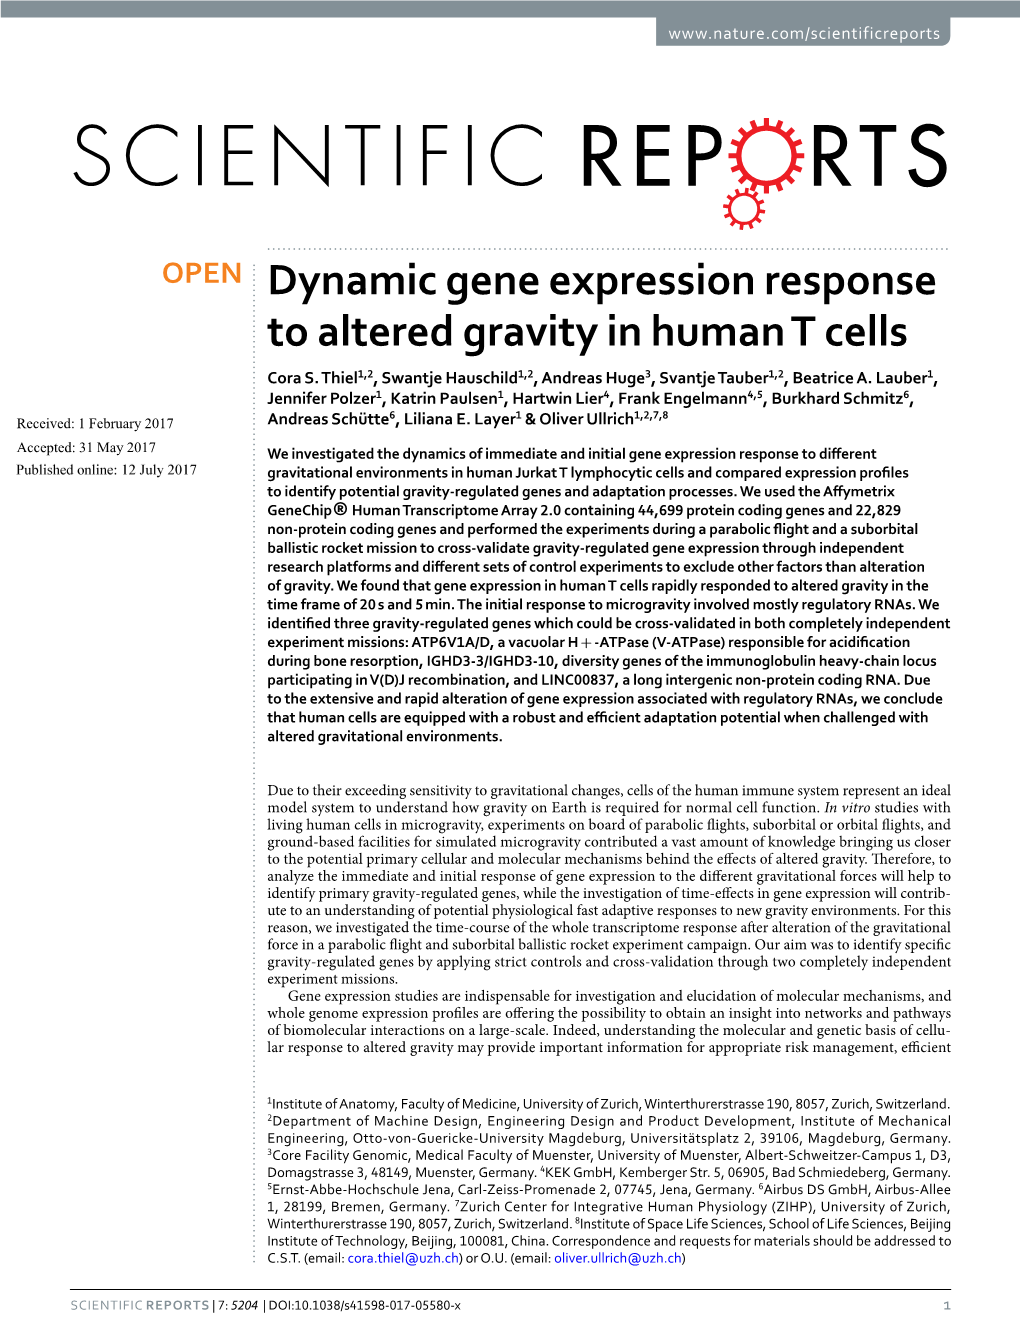 'Dynamic Gene Expression Response to Altered Gravity in Human